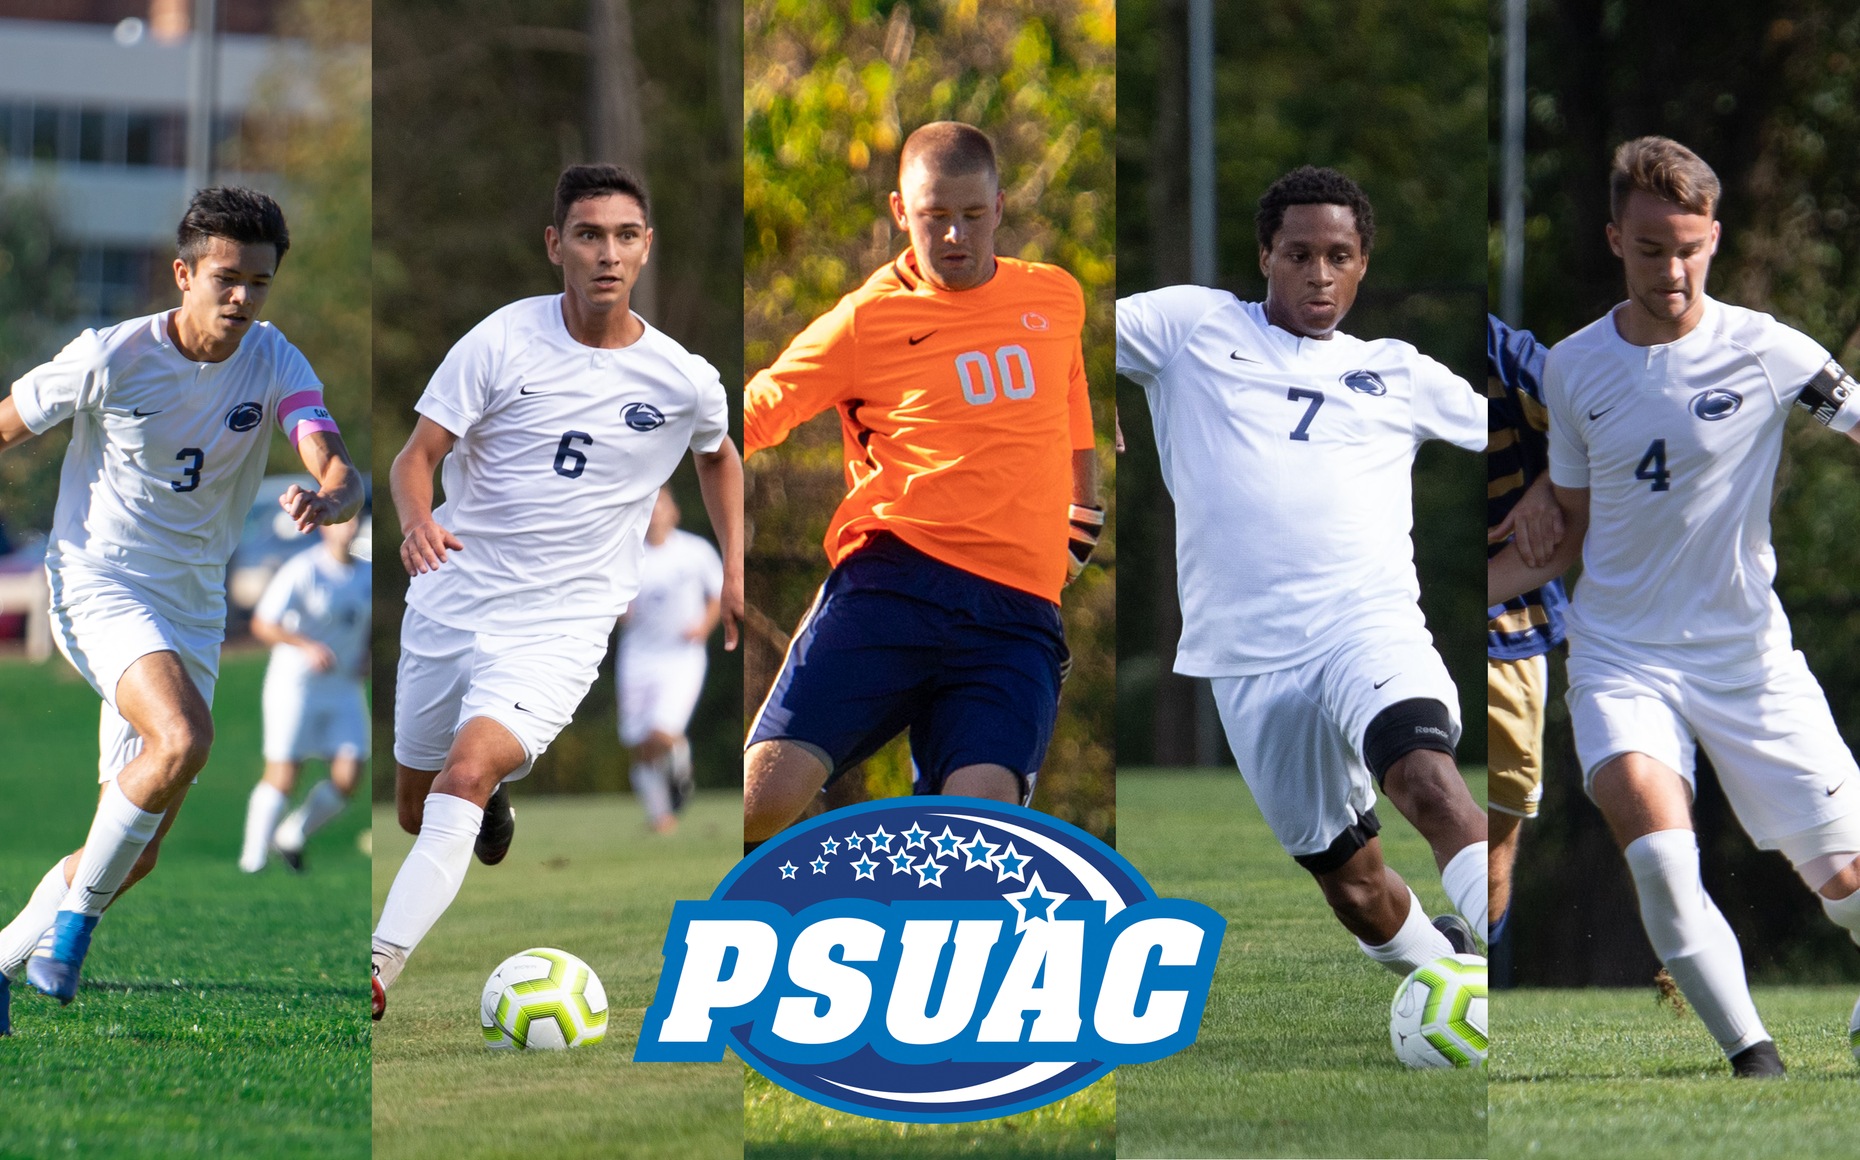 Five Earn Spots on PSUAC Men's Soccer All-Conference Teams